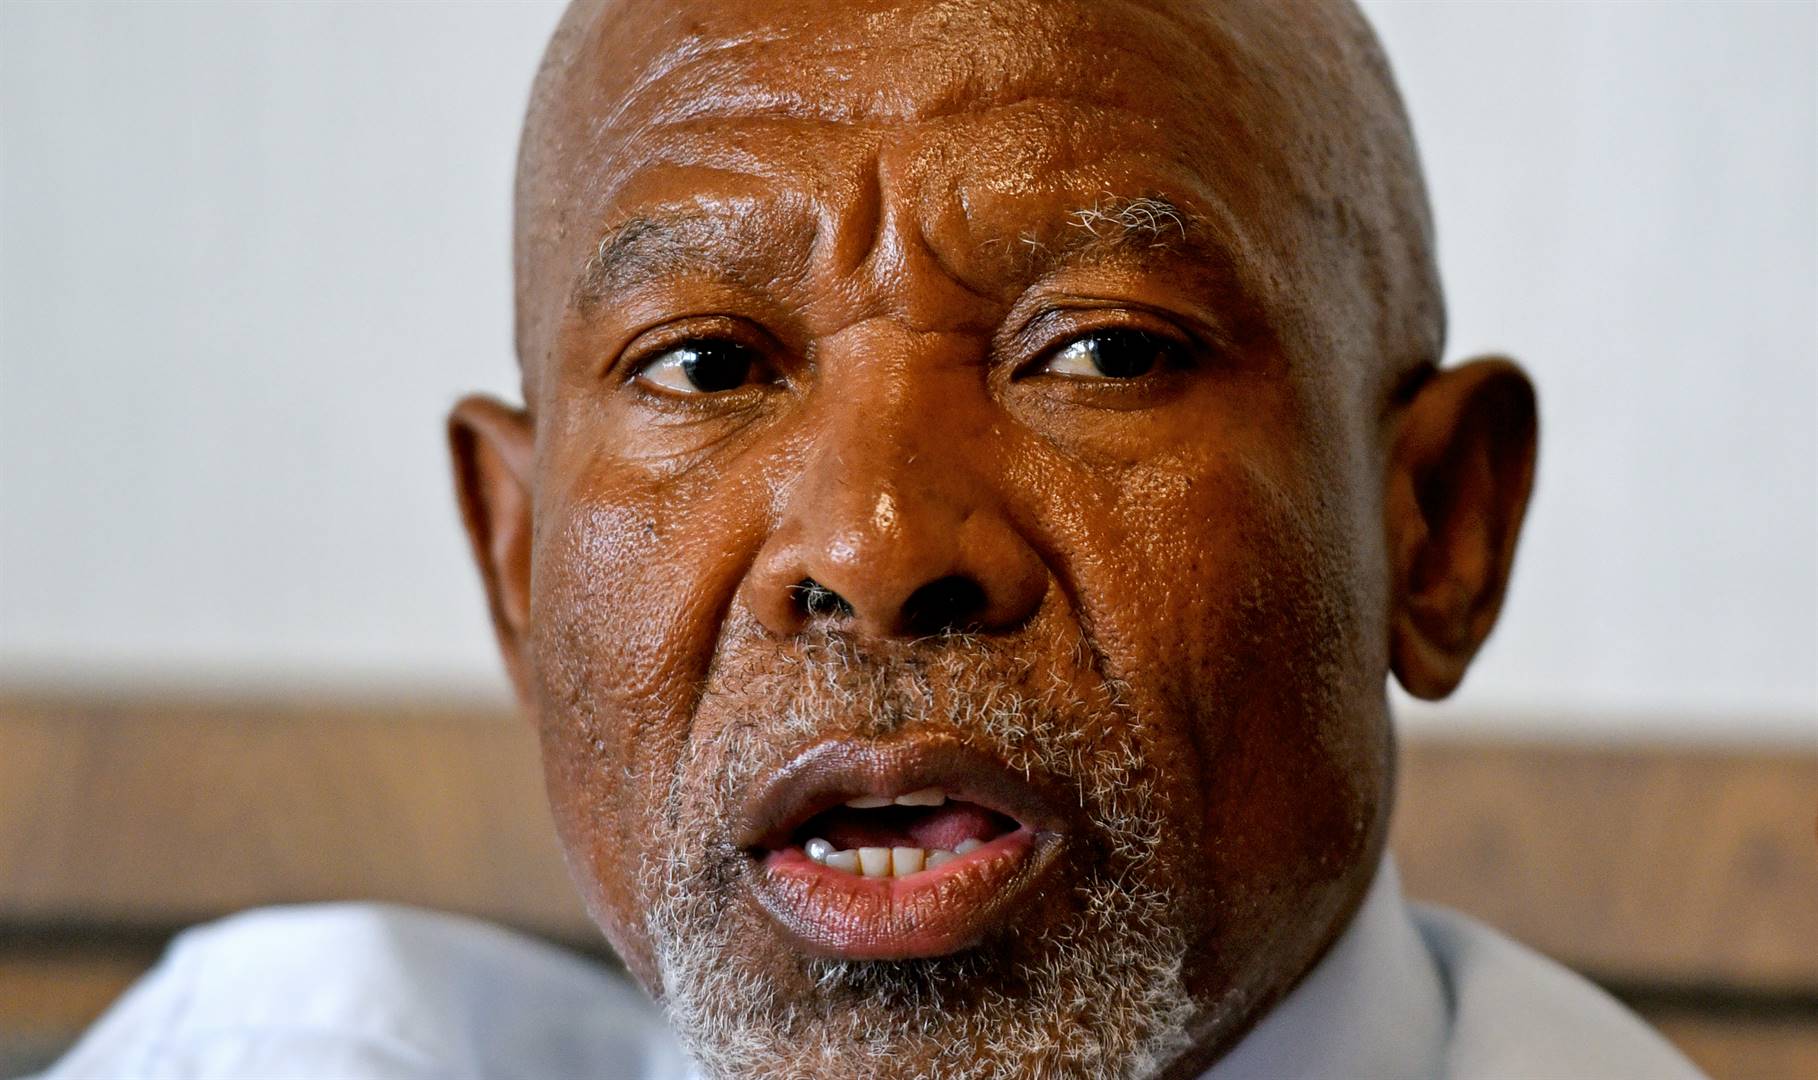 News24 | Kganyago wants to appoint one more interest rate decision-maker 